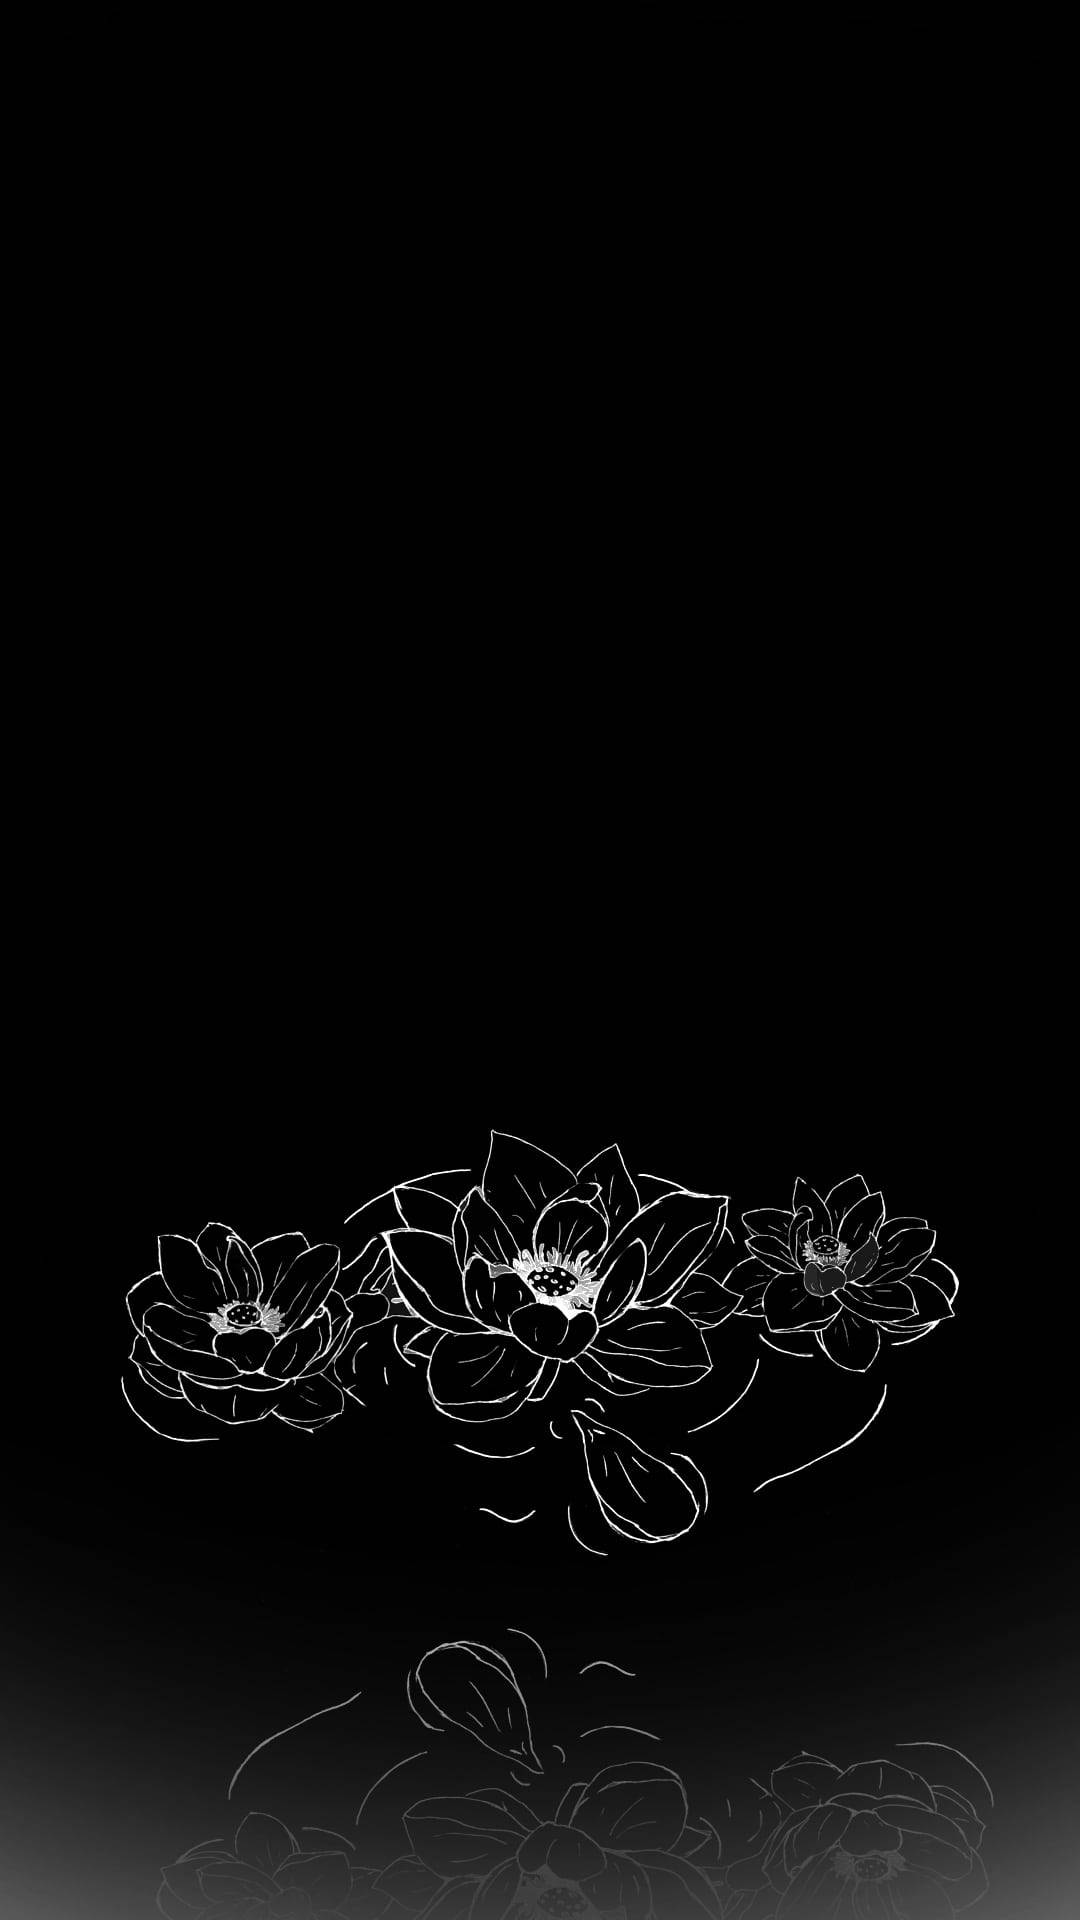 Caption: Majestic Trio of Black and White Flowers Wallpaper